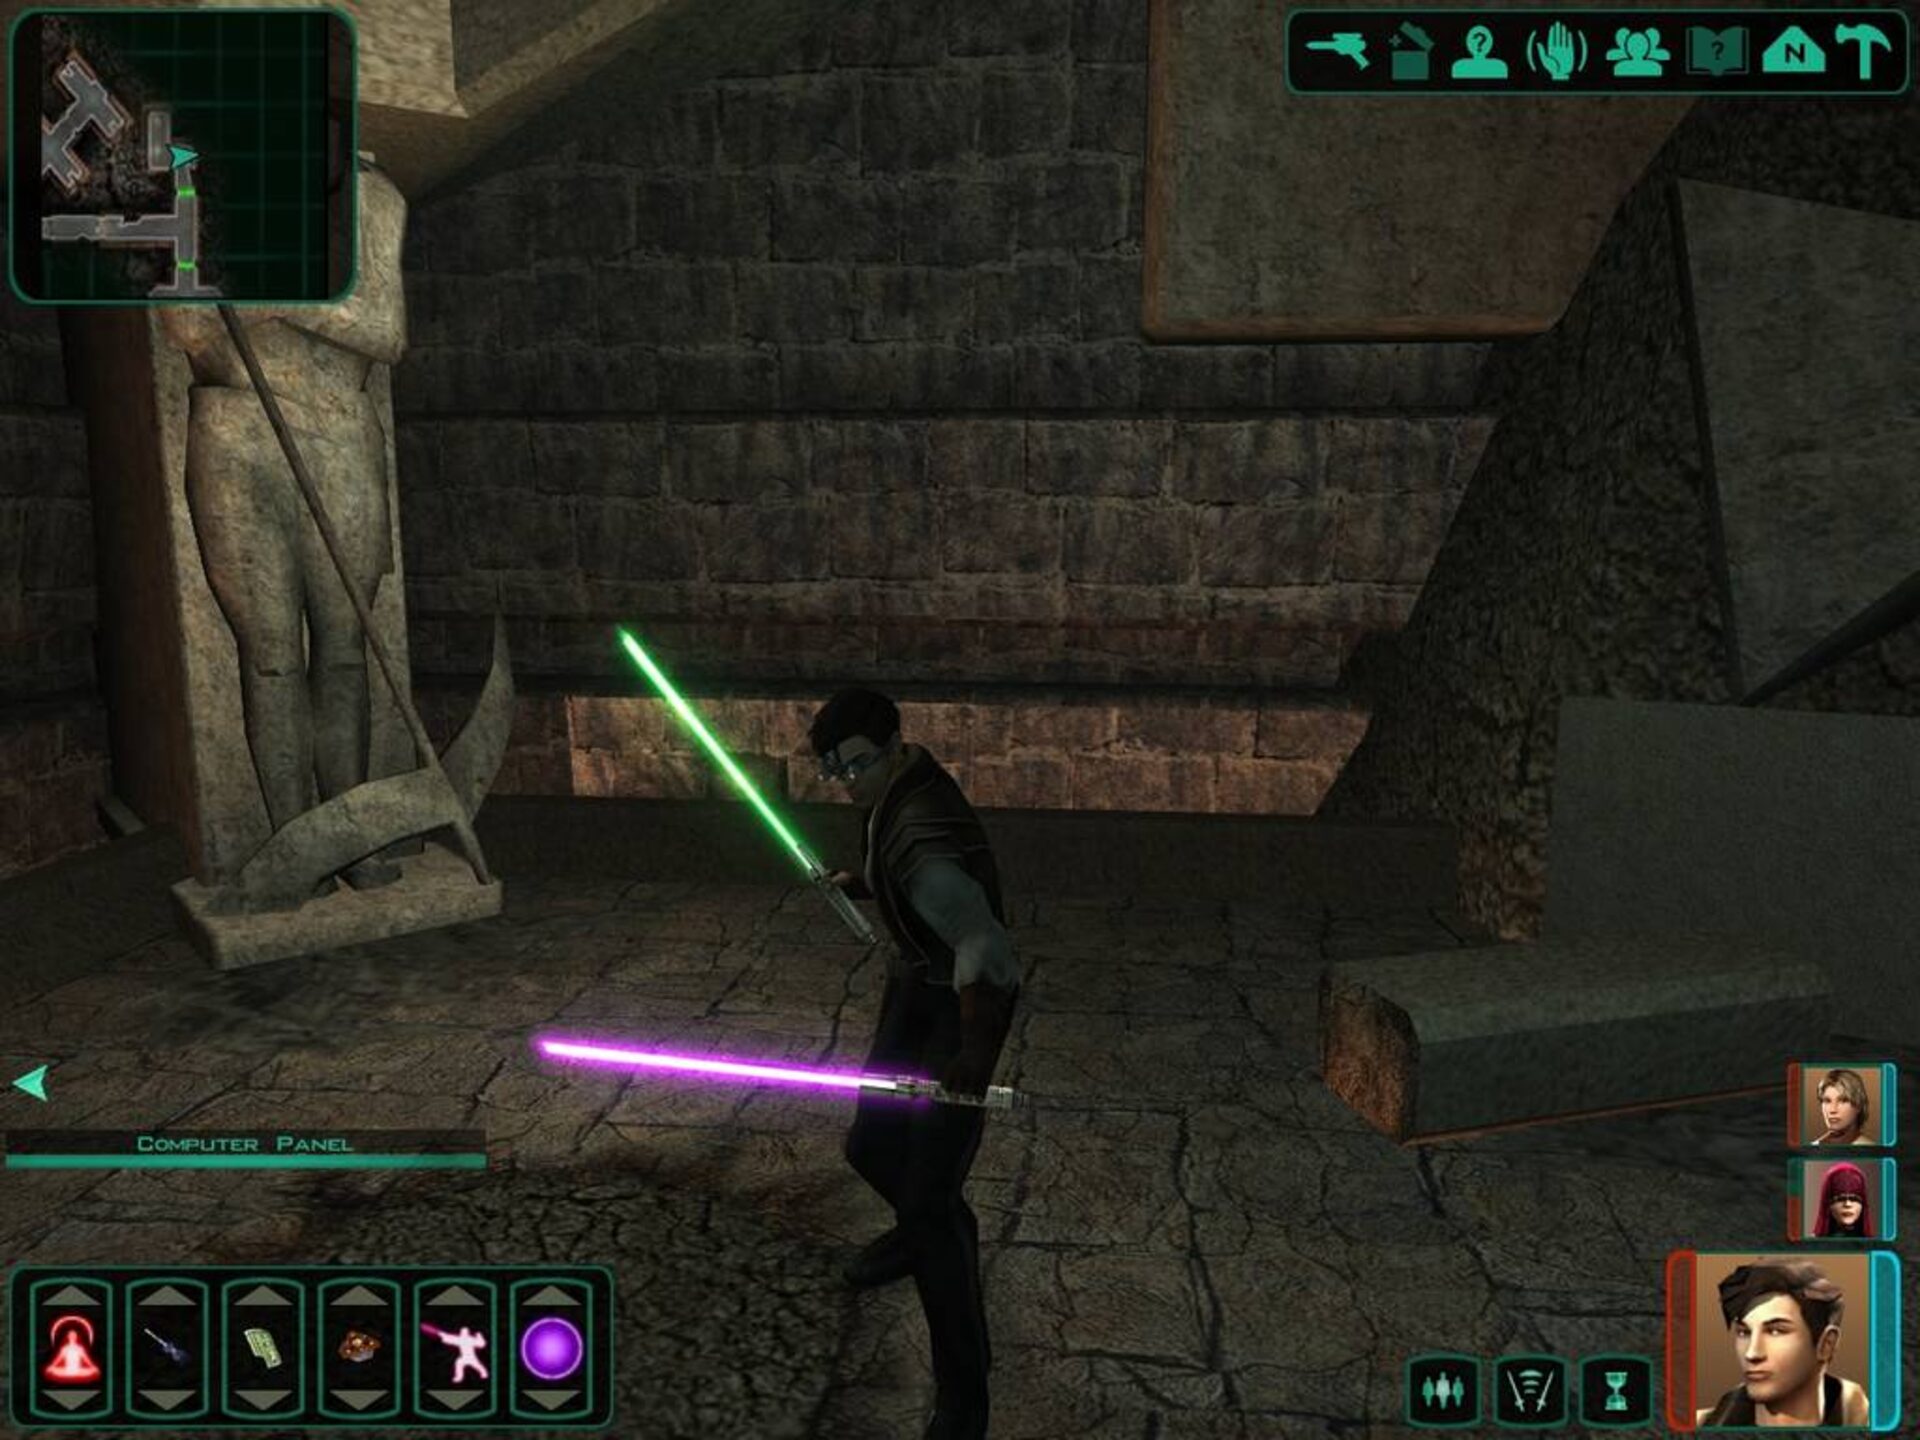 Star wars knight of the old republic 2 русификатор steam фото 99